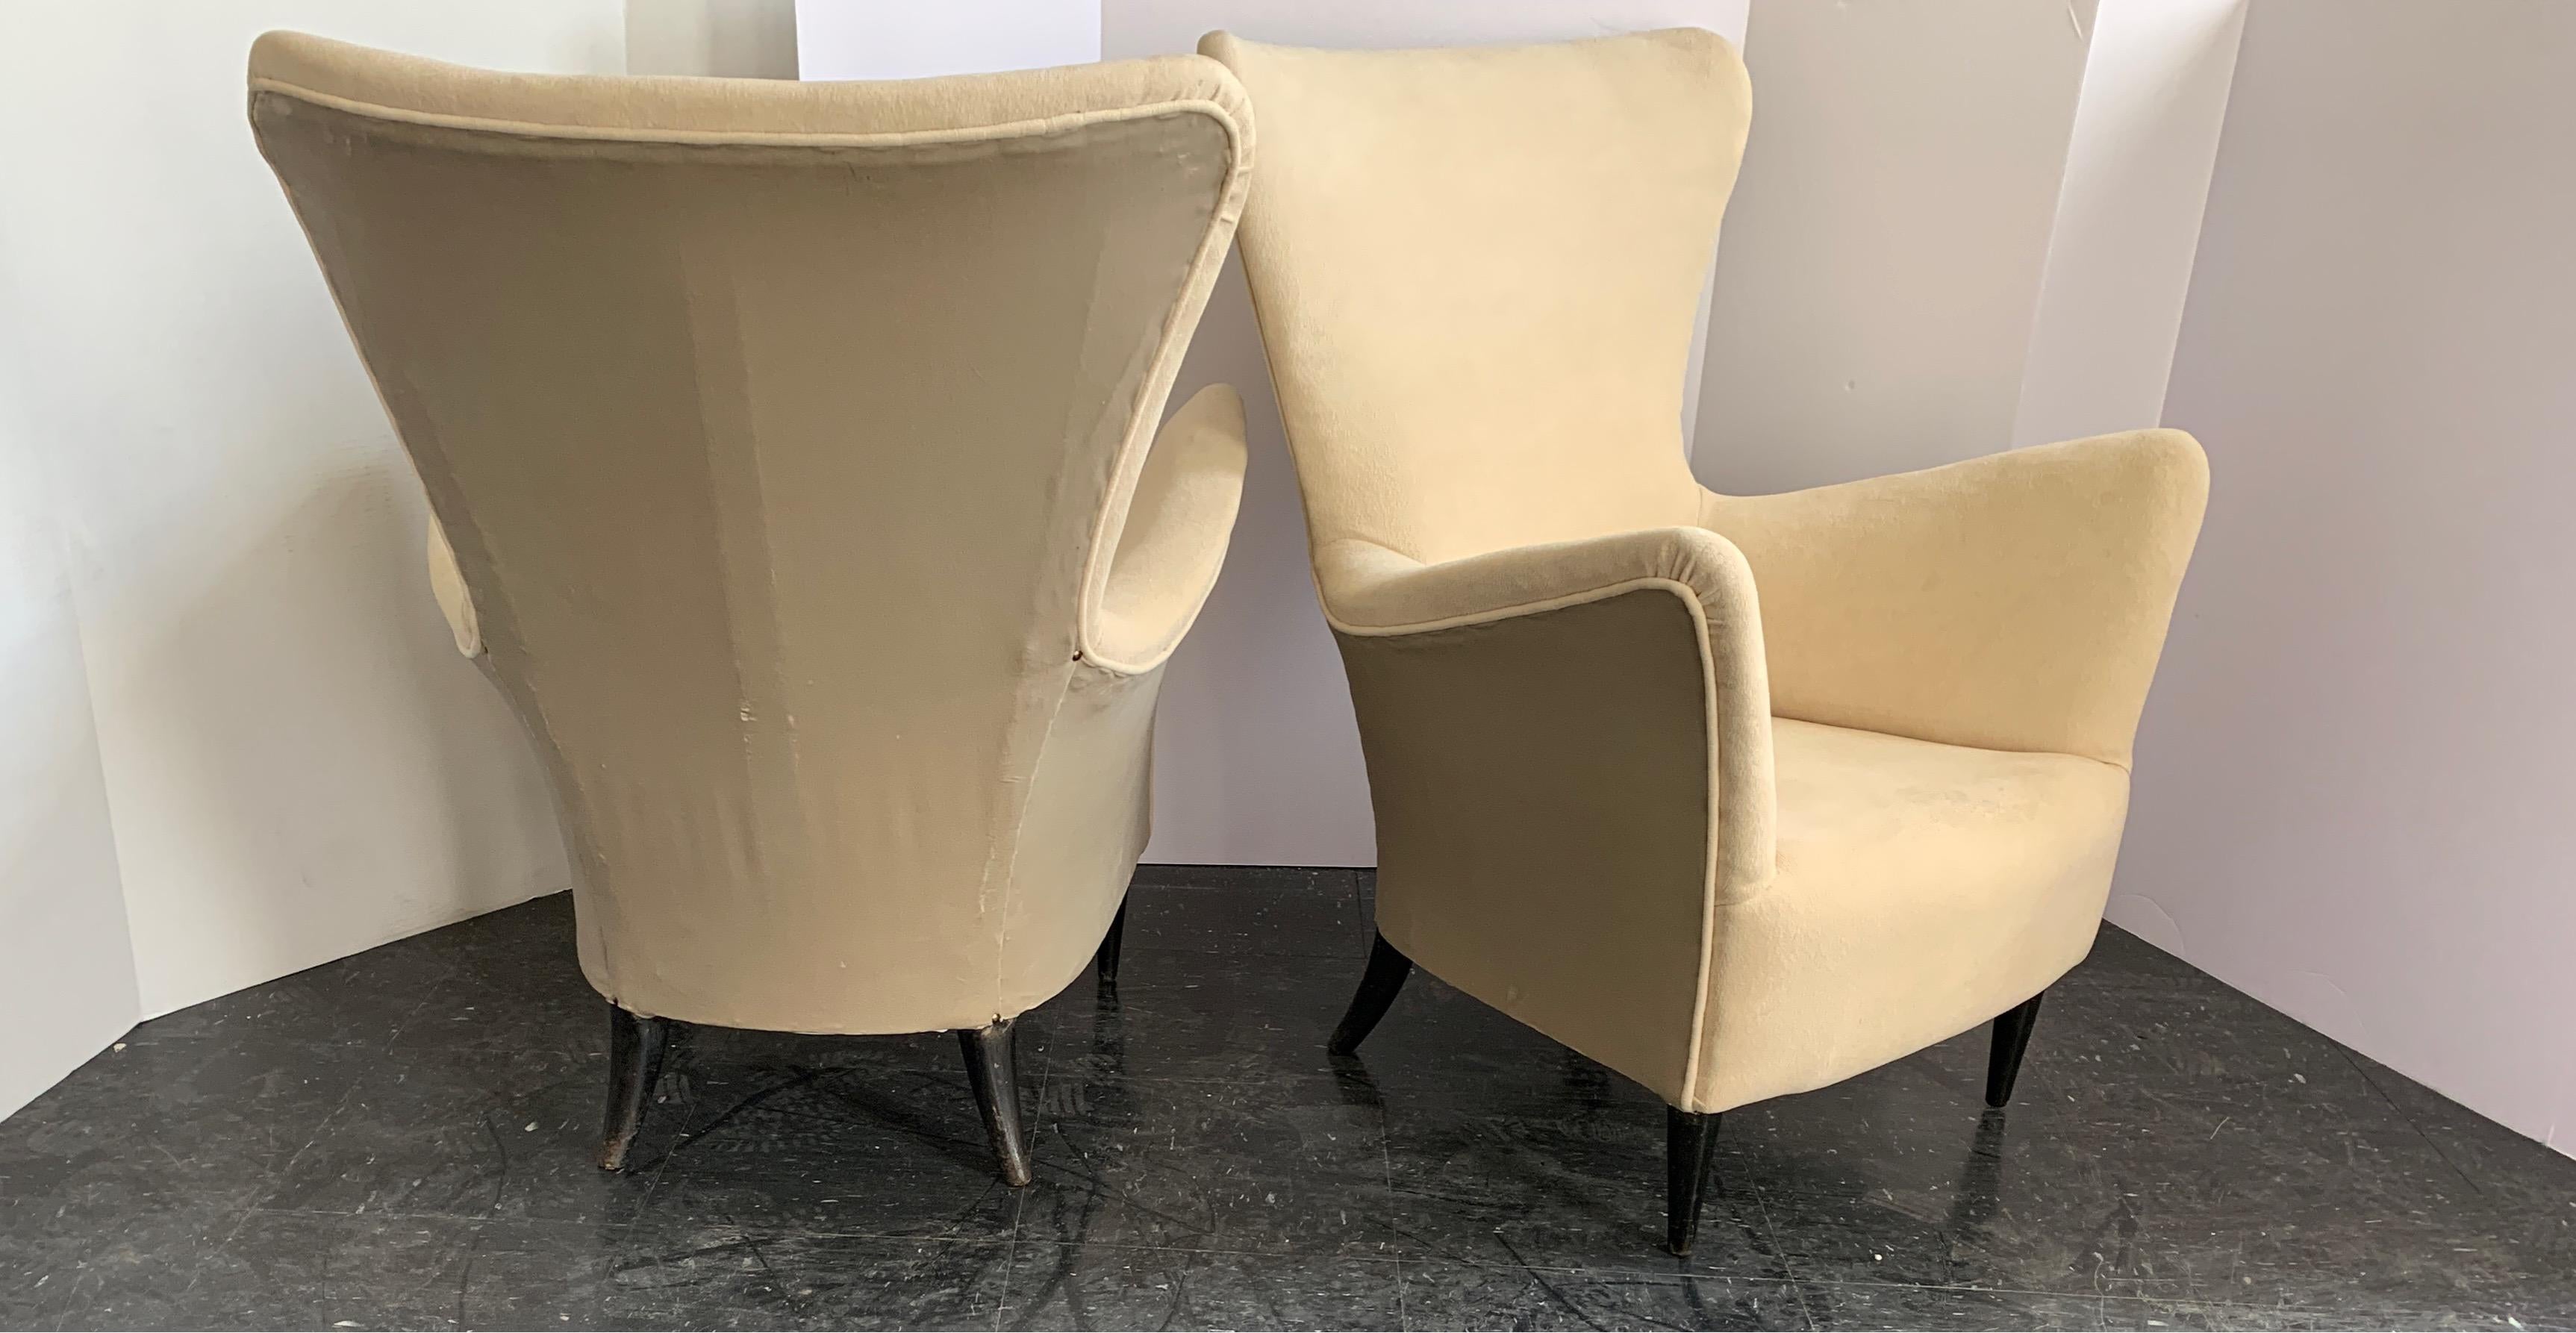 These 1960s Mid-Century Modern Italian chairs have all the comfort with tons of style. The are done in a two-tone fabric and the legs are a black painted wood. They do have scratches on the legs but overall in great condition. Gio Ponti was a great